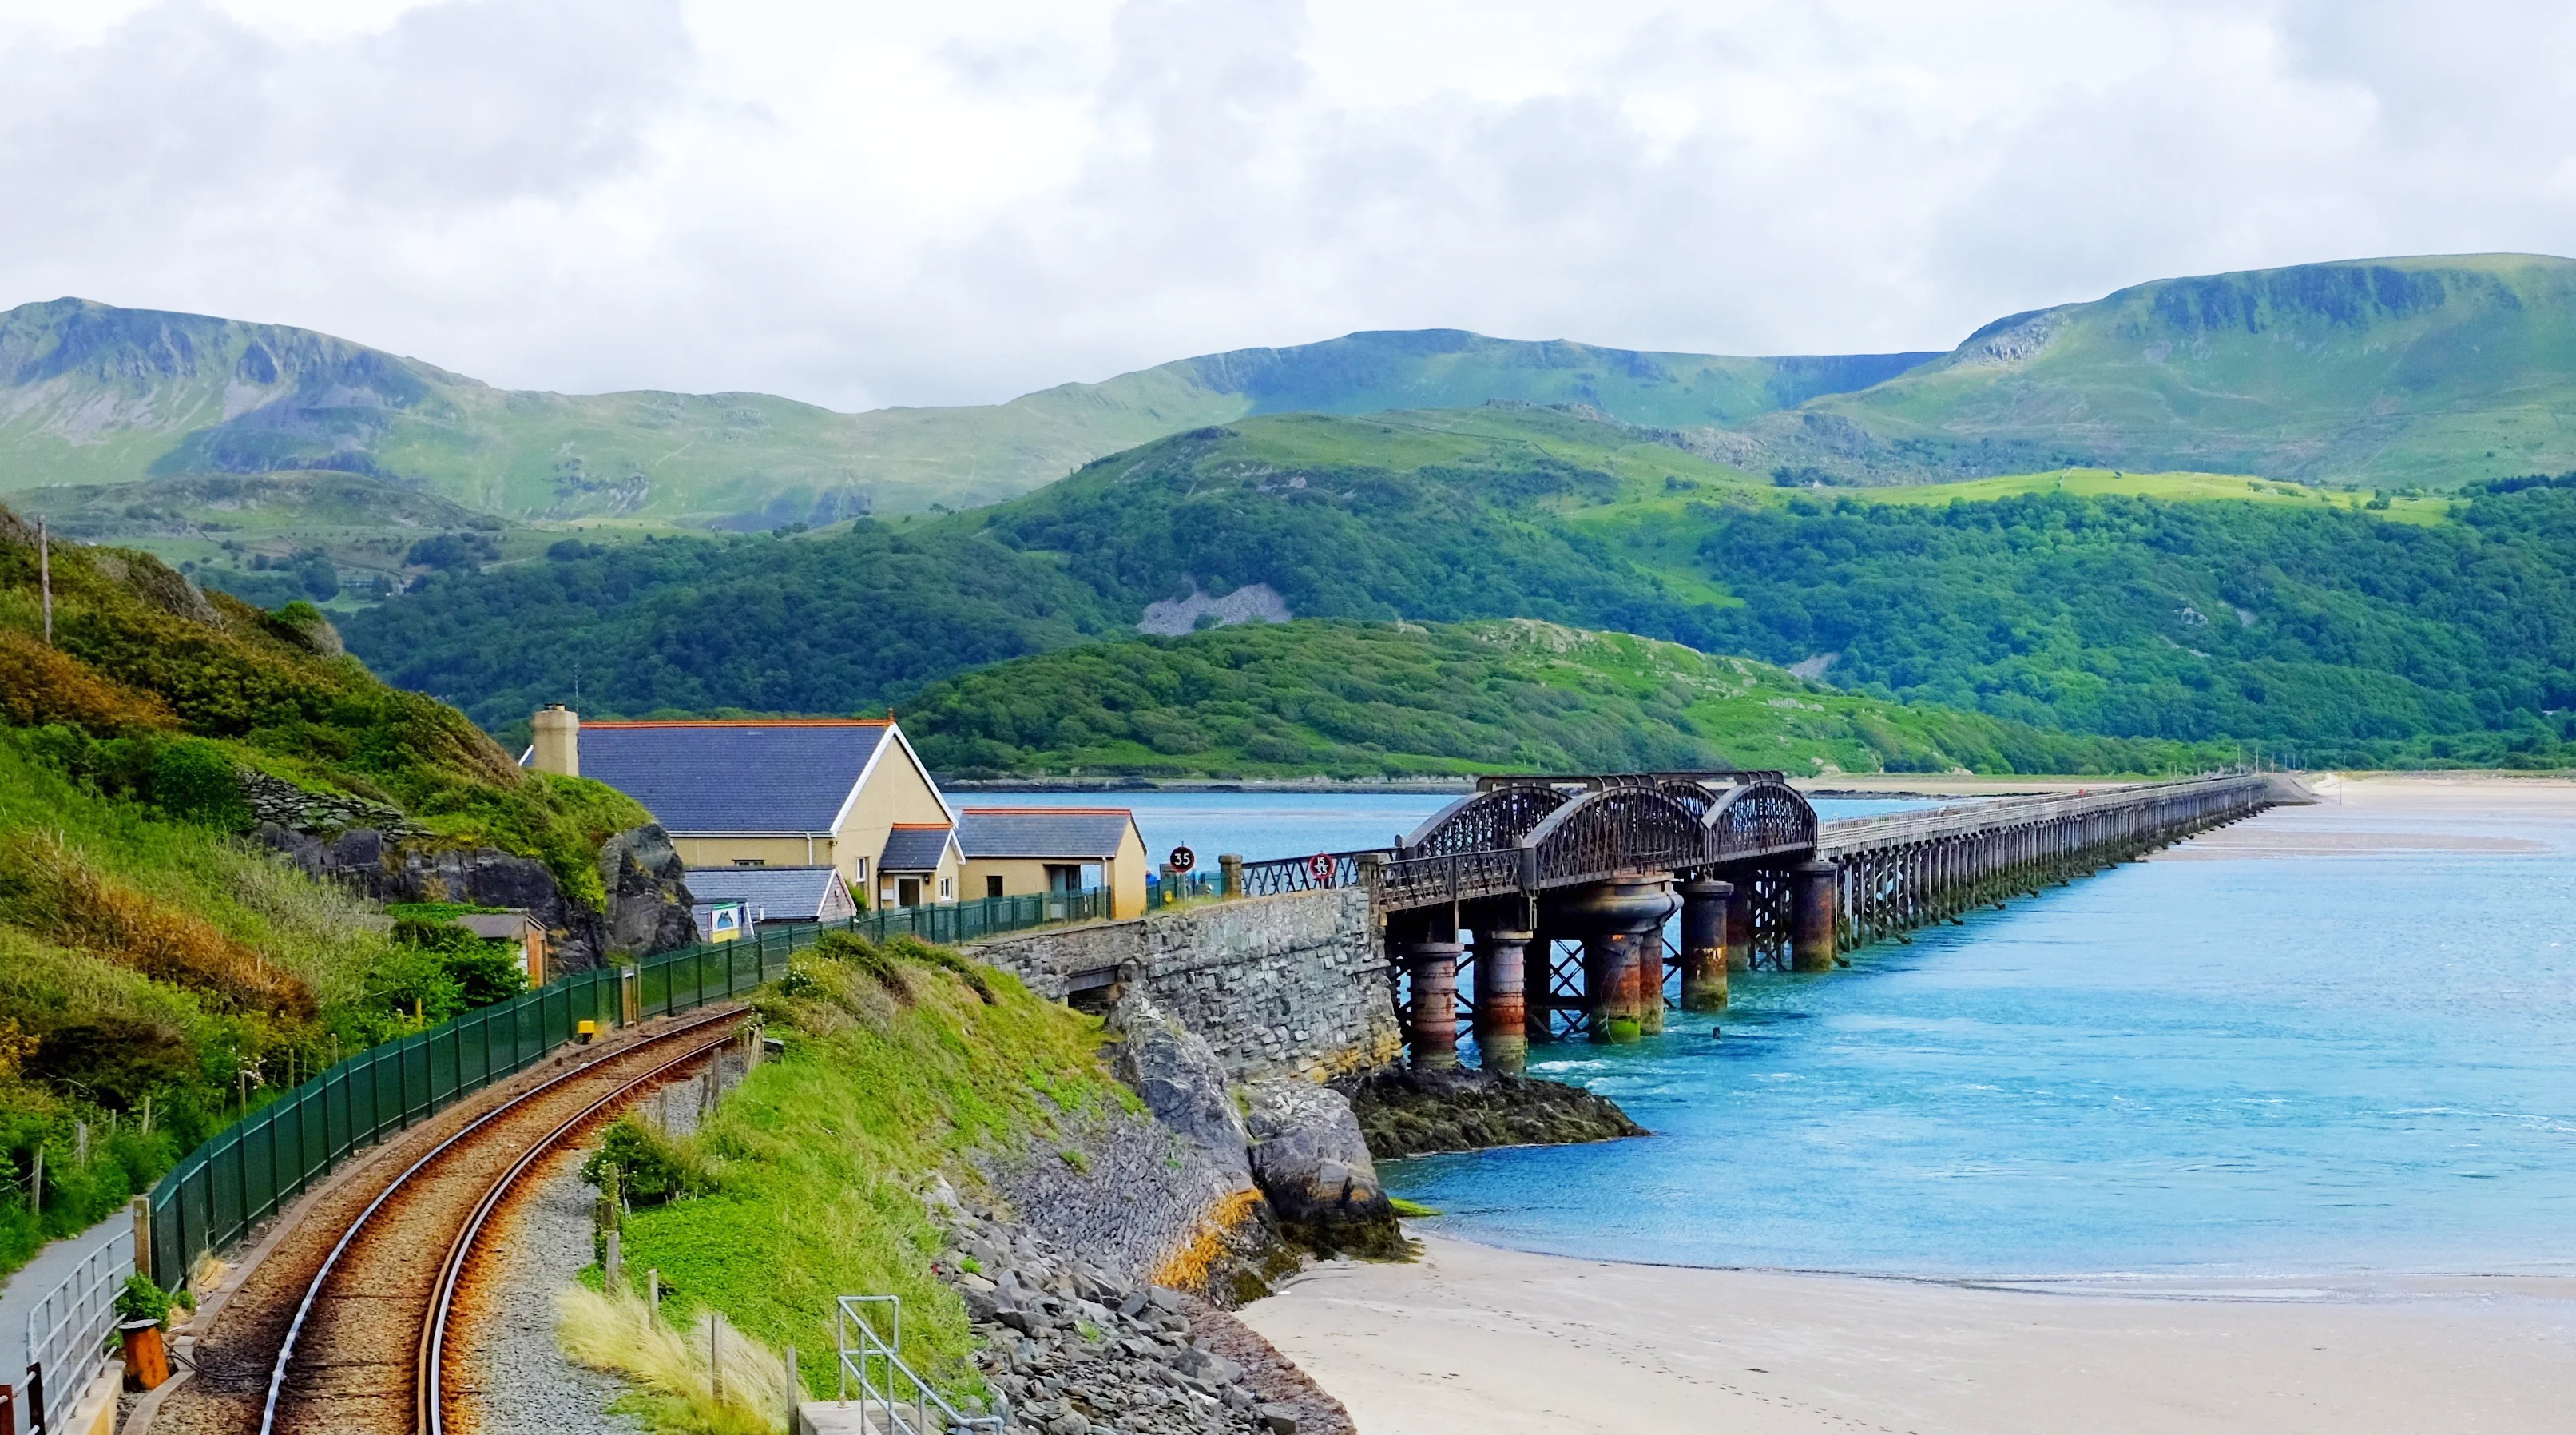 A railway bridge over a sandy beach with blue sea, with green hills in the background